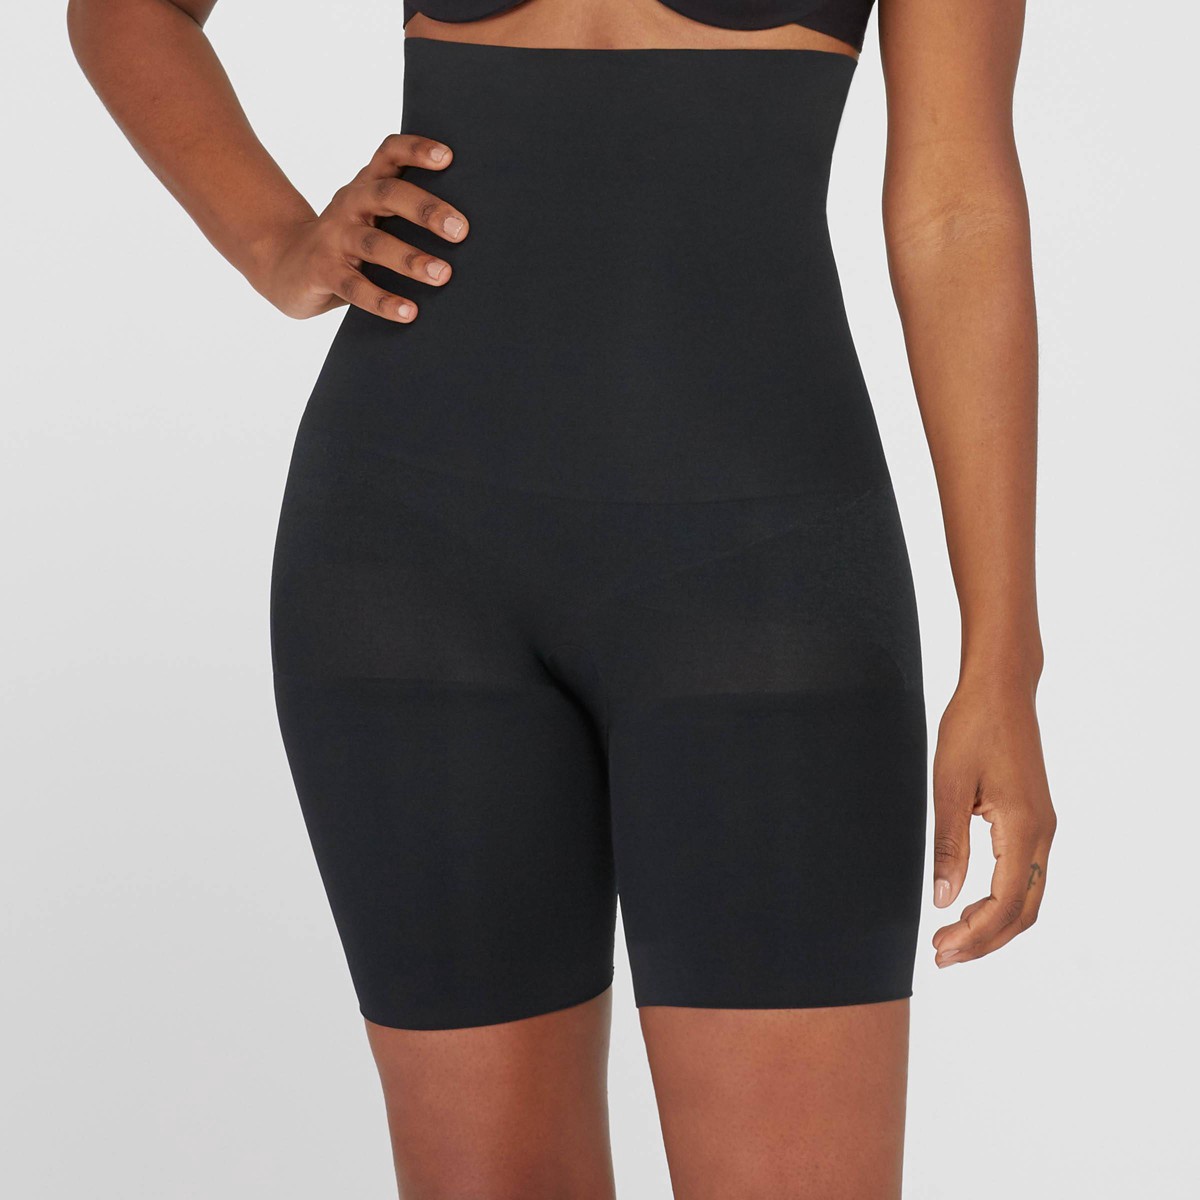 slide 1 of 5, ASSETS by SPANX Women's Remarkable Results High-Waist Mid-thigh Shaper - Black L, 1 ct